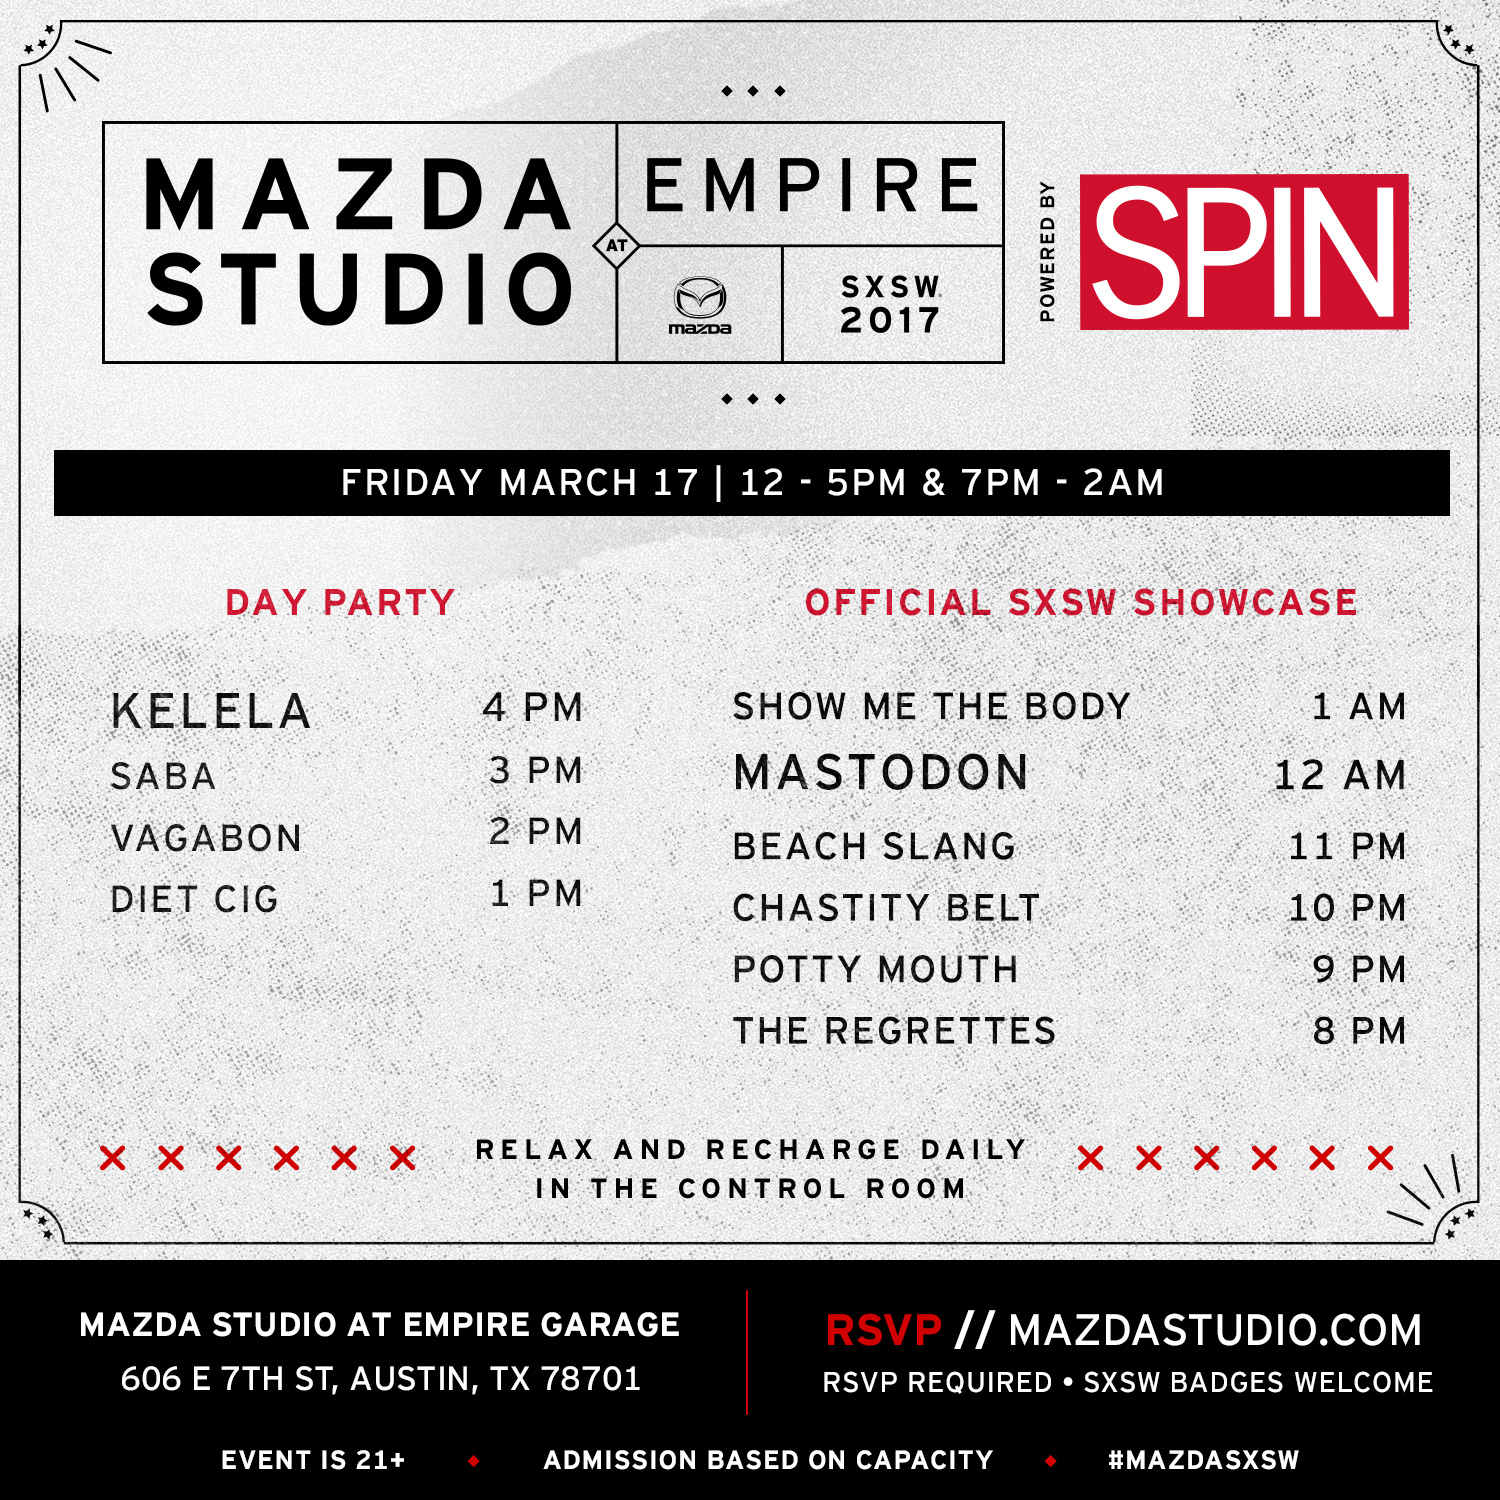 SPIN SXSW 2017 Showcases at Mazda Studio at Empire: Mastodon, Danny Brown, Lil Yachty, and More